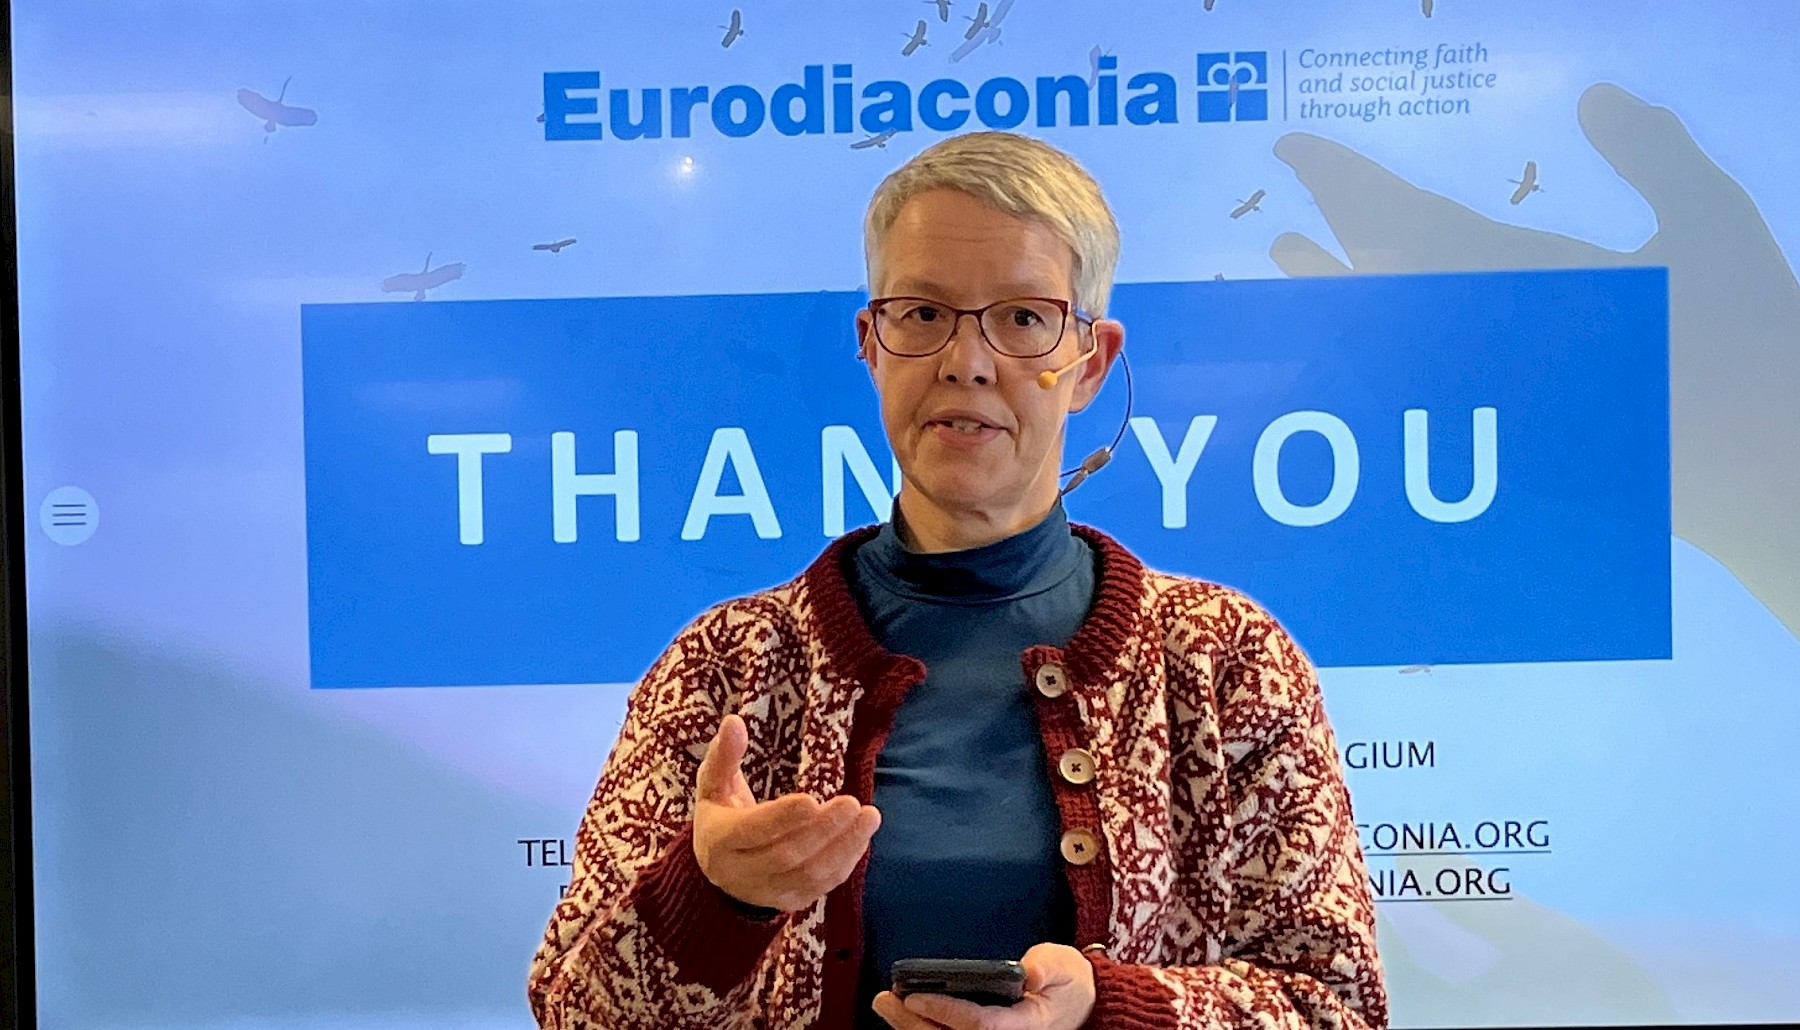 Ingunn Moser, CEO of Diakonhjemmet and leader of the Diaconi Leader Forum, spoke about the value of collaboration with other diaconal organizations